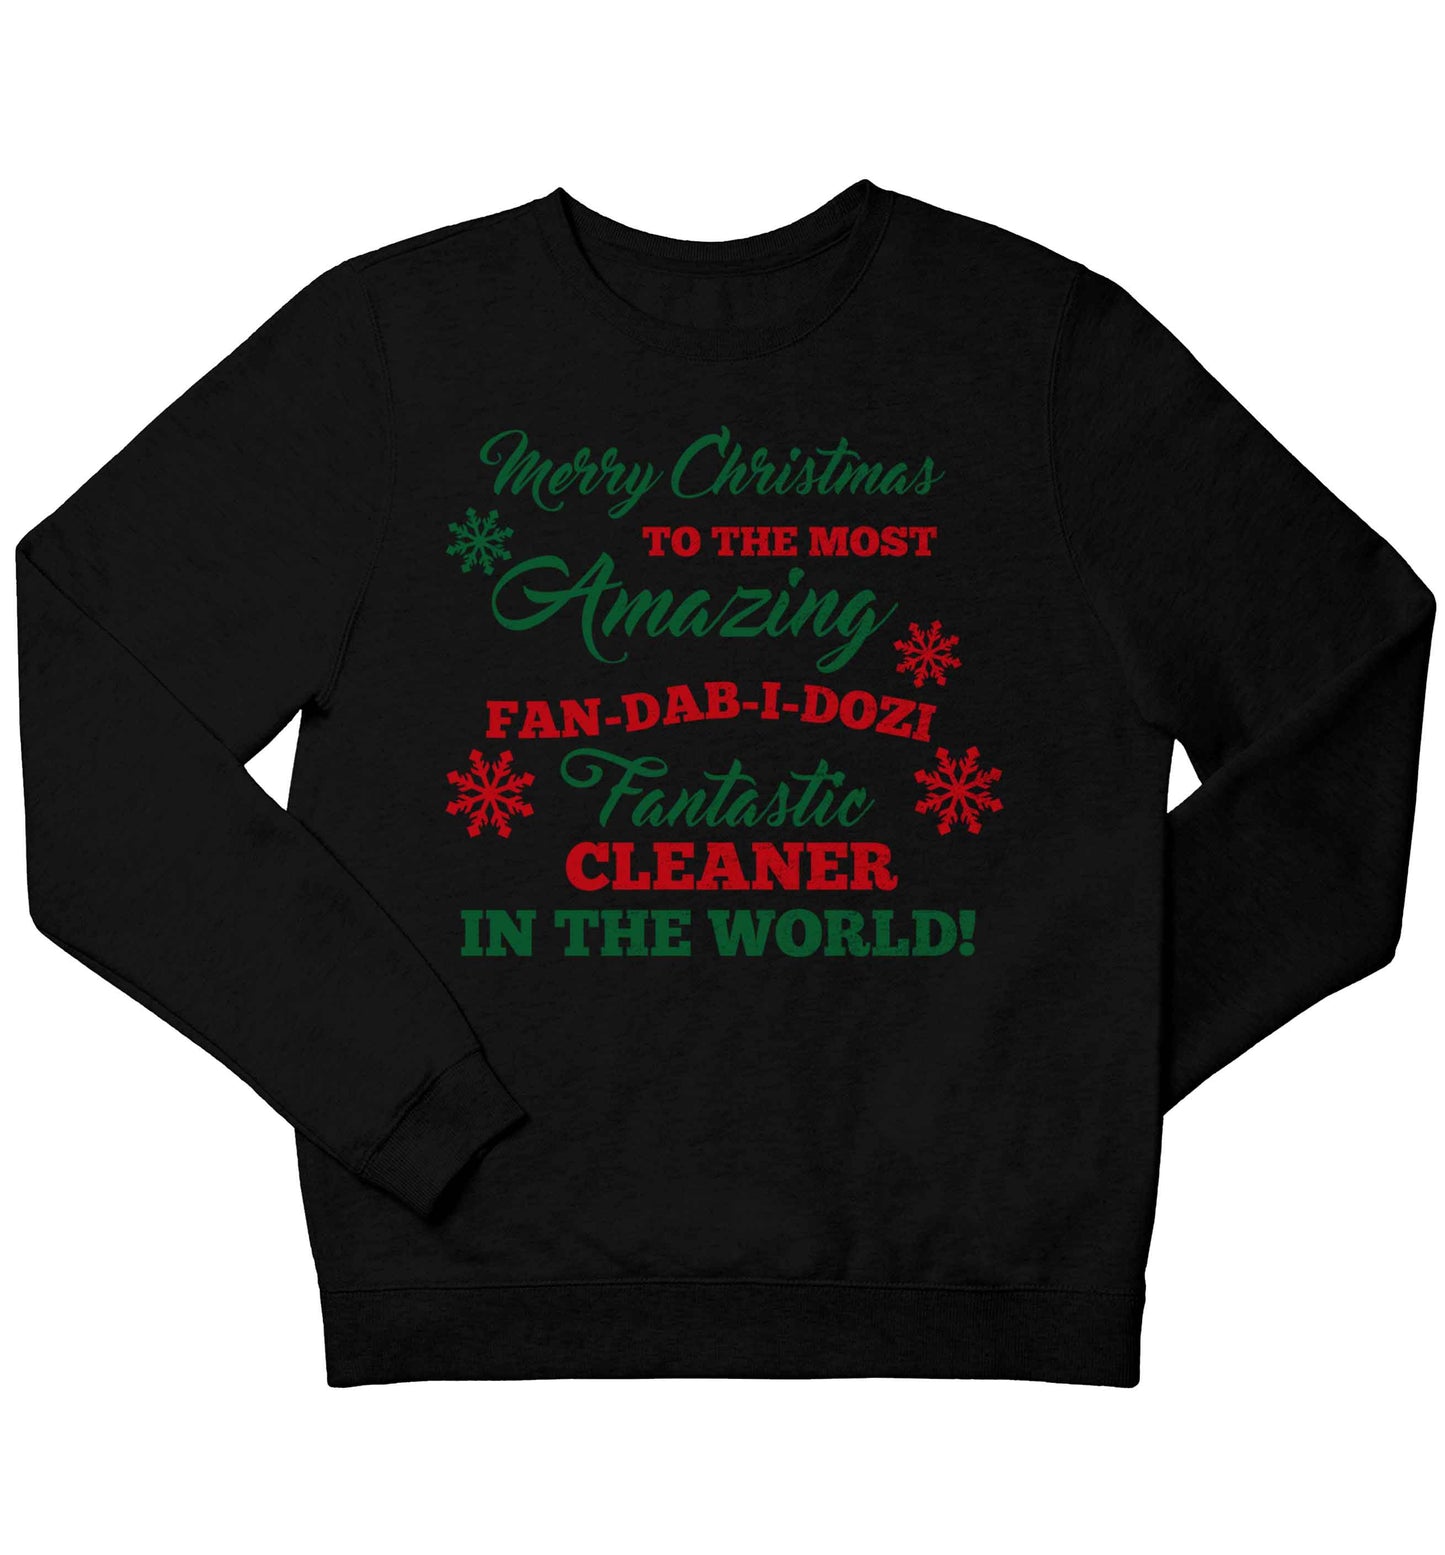 Merry Christmas to the most amazing fan-dab-i-dozi fantasic cleaner in the world children's black sweater 12-13 Years